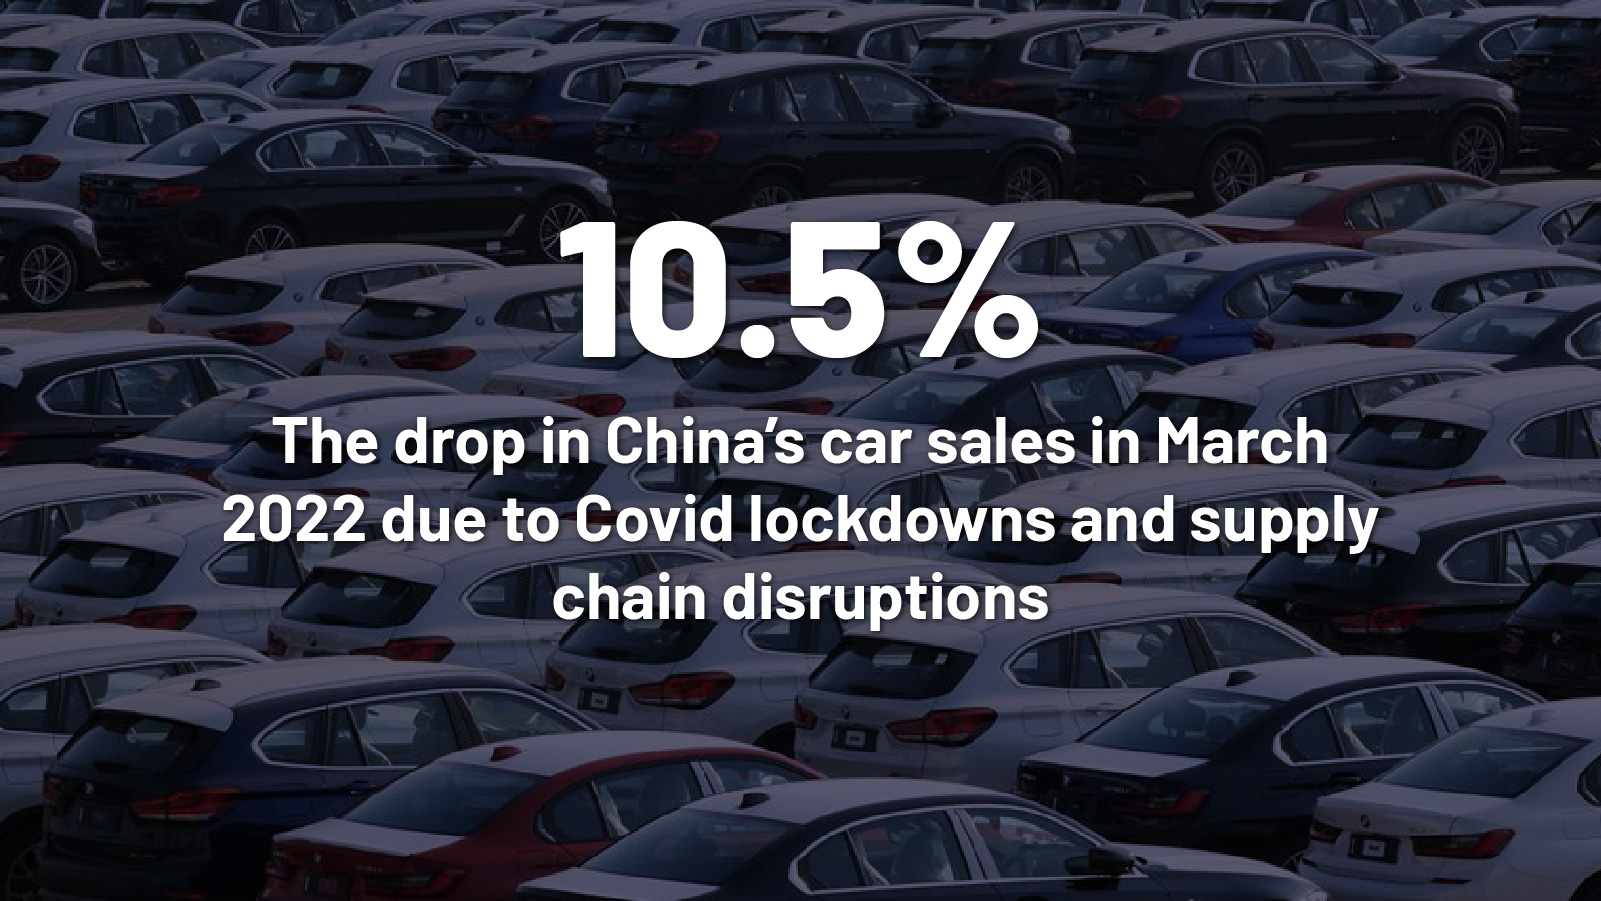 The drop in China’s car sales in March 2022 due to Covid lockdowns and supply chain disruptions